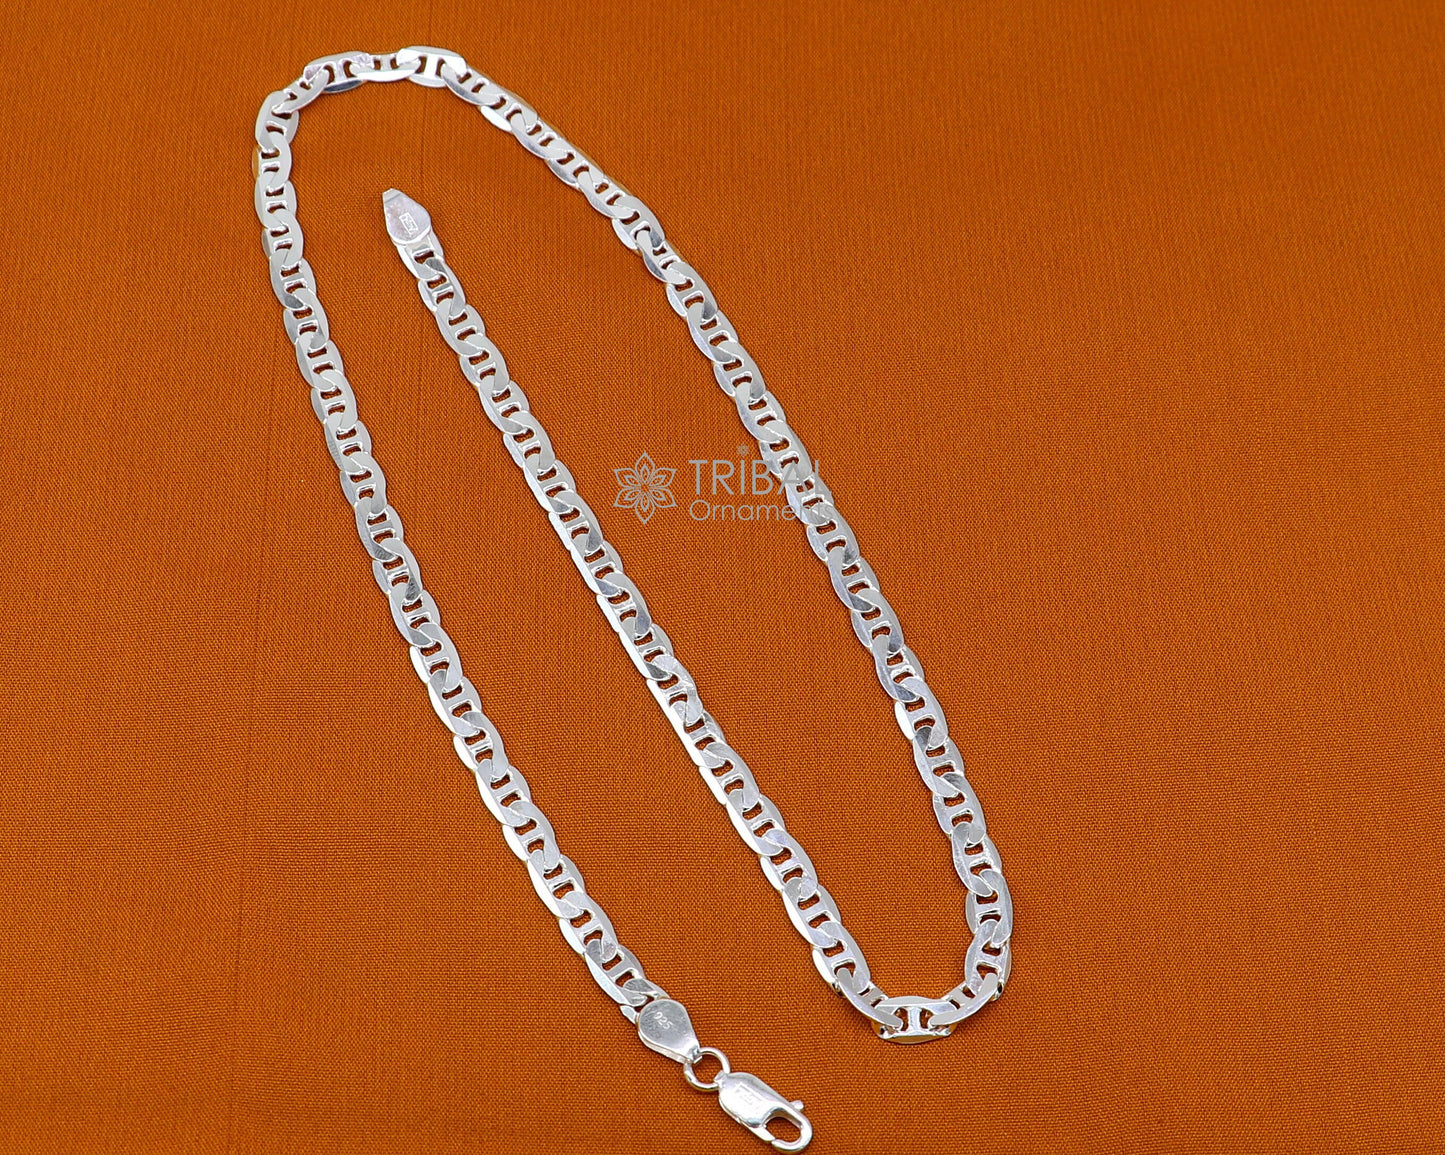 20" 3.5 MM 925 sterling silver handmade solid fancy stylish silver chain necklace Nawabi chain best gifting jewelry from India ch229 - TRIBAL ORNAMENTS